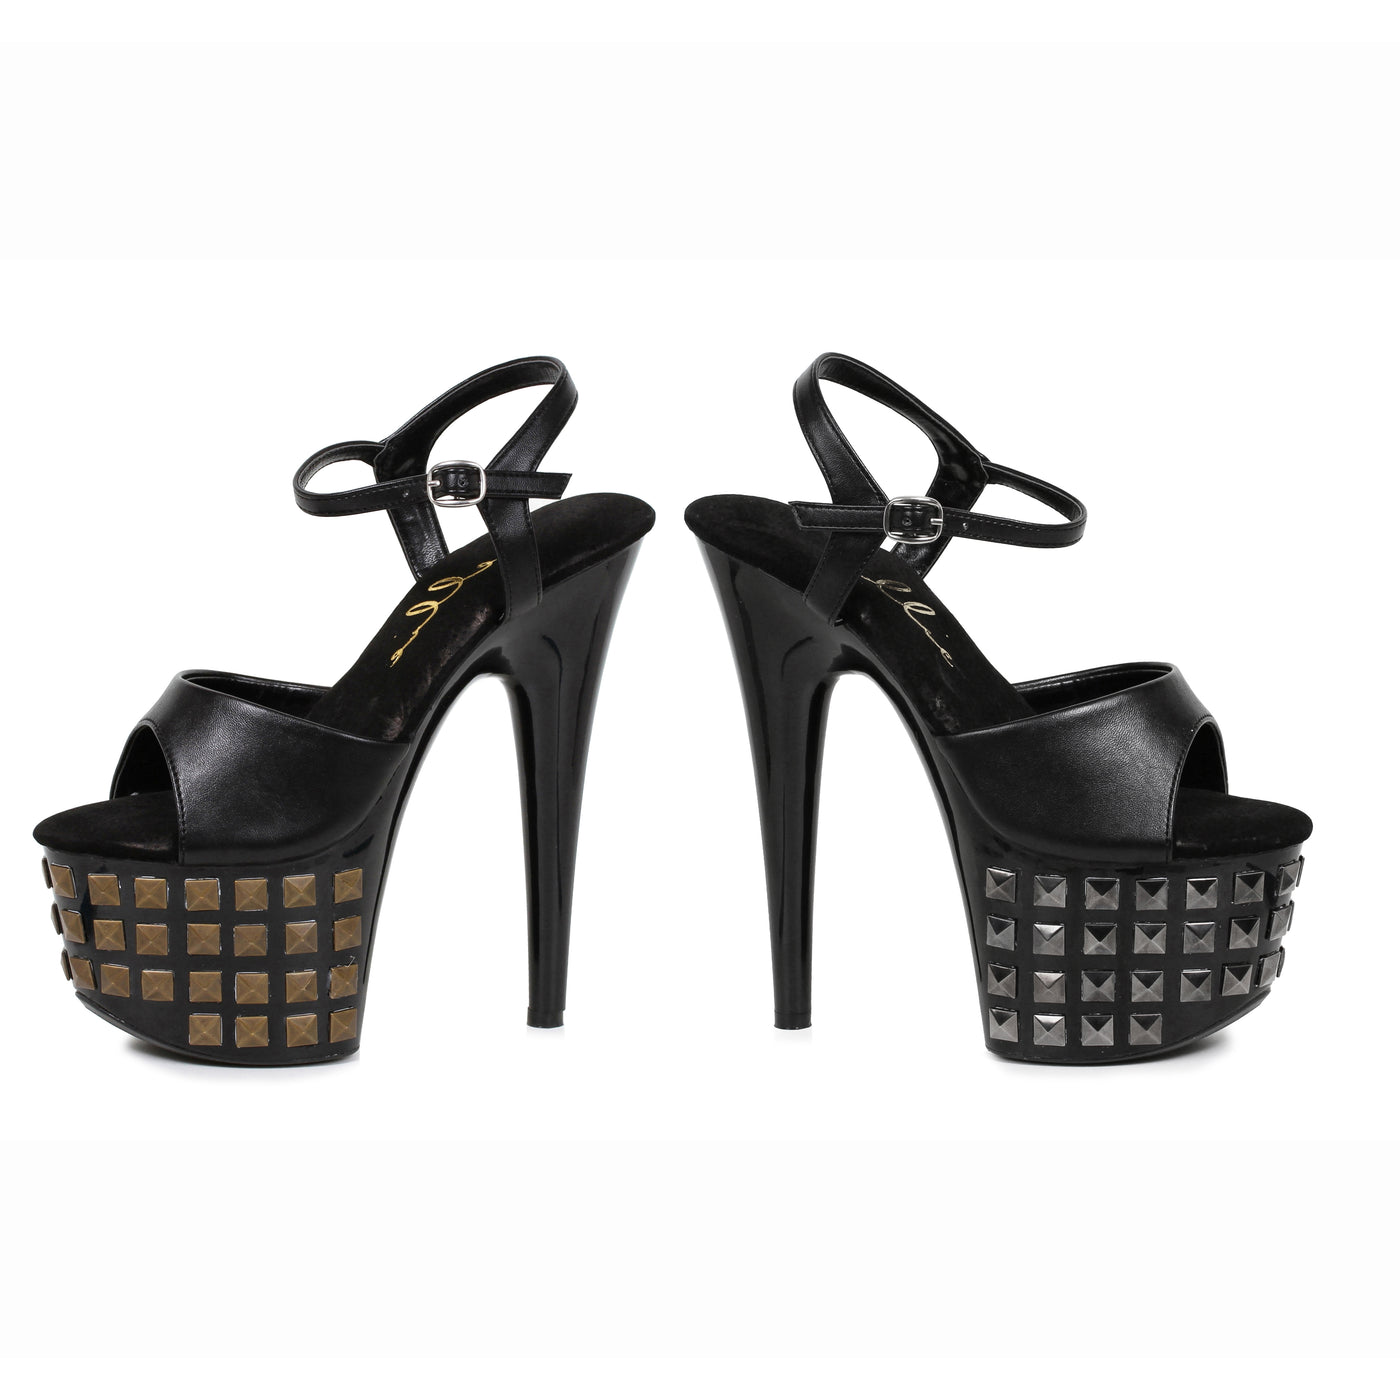 7" STUDDED SHOES